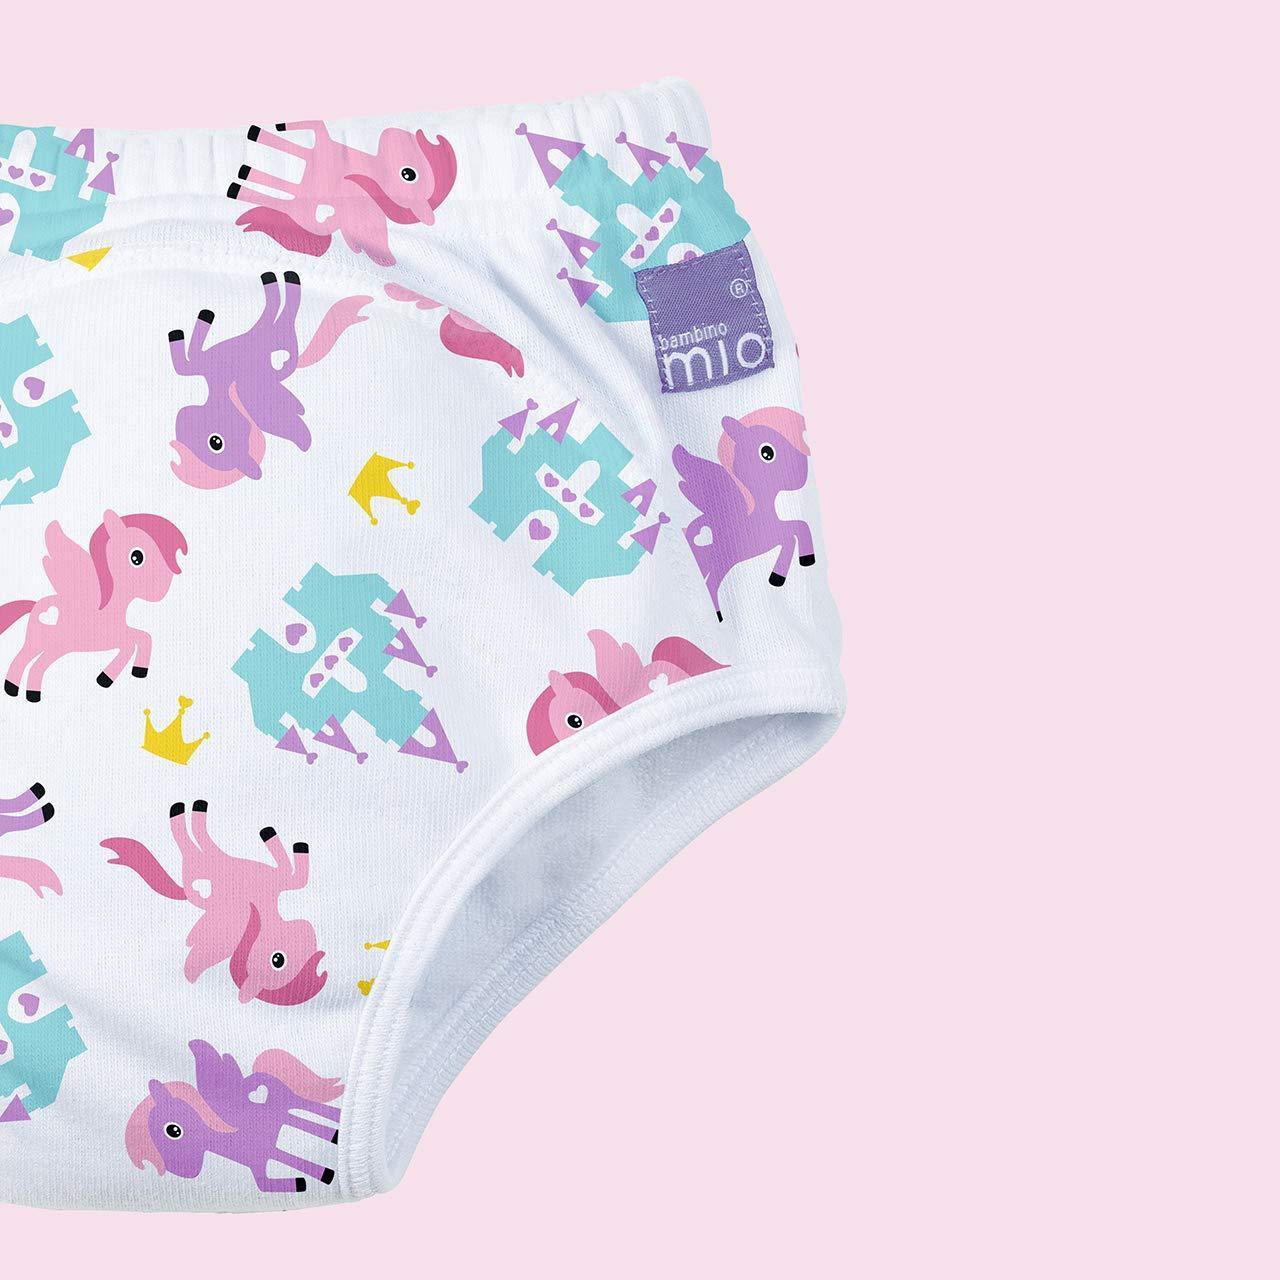 https://www.nordbaby.com/products/images/g110000/111843/nappies-and-covers-bambinomio-multicolor-bambinomio-potty-training-pants-pegasus-palace-111843-28609.jpg